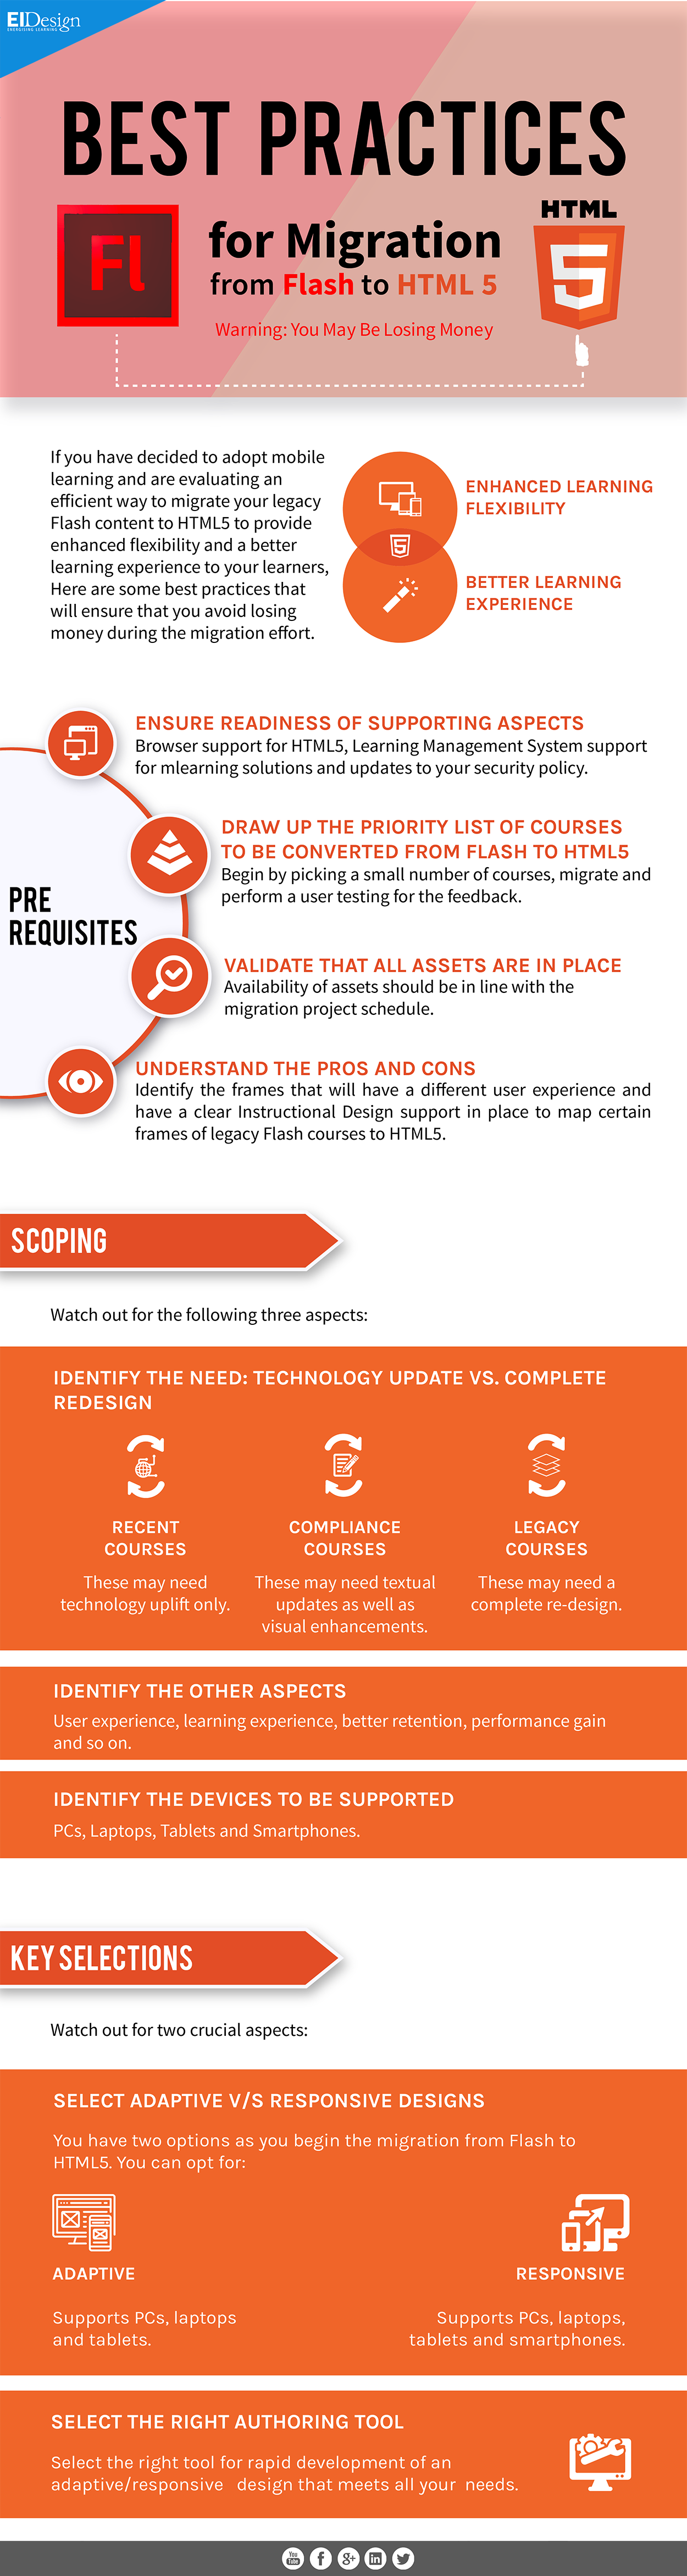 Migrating from Flash to HTML5: Route Map for Legacy Content - Infographic